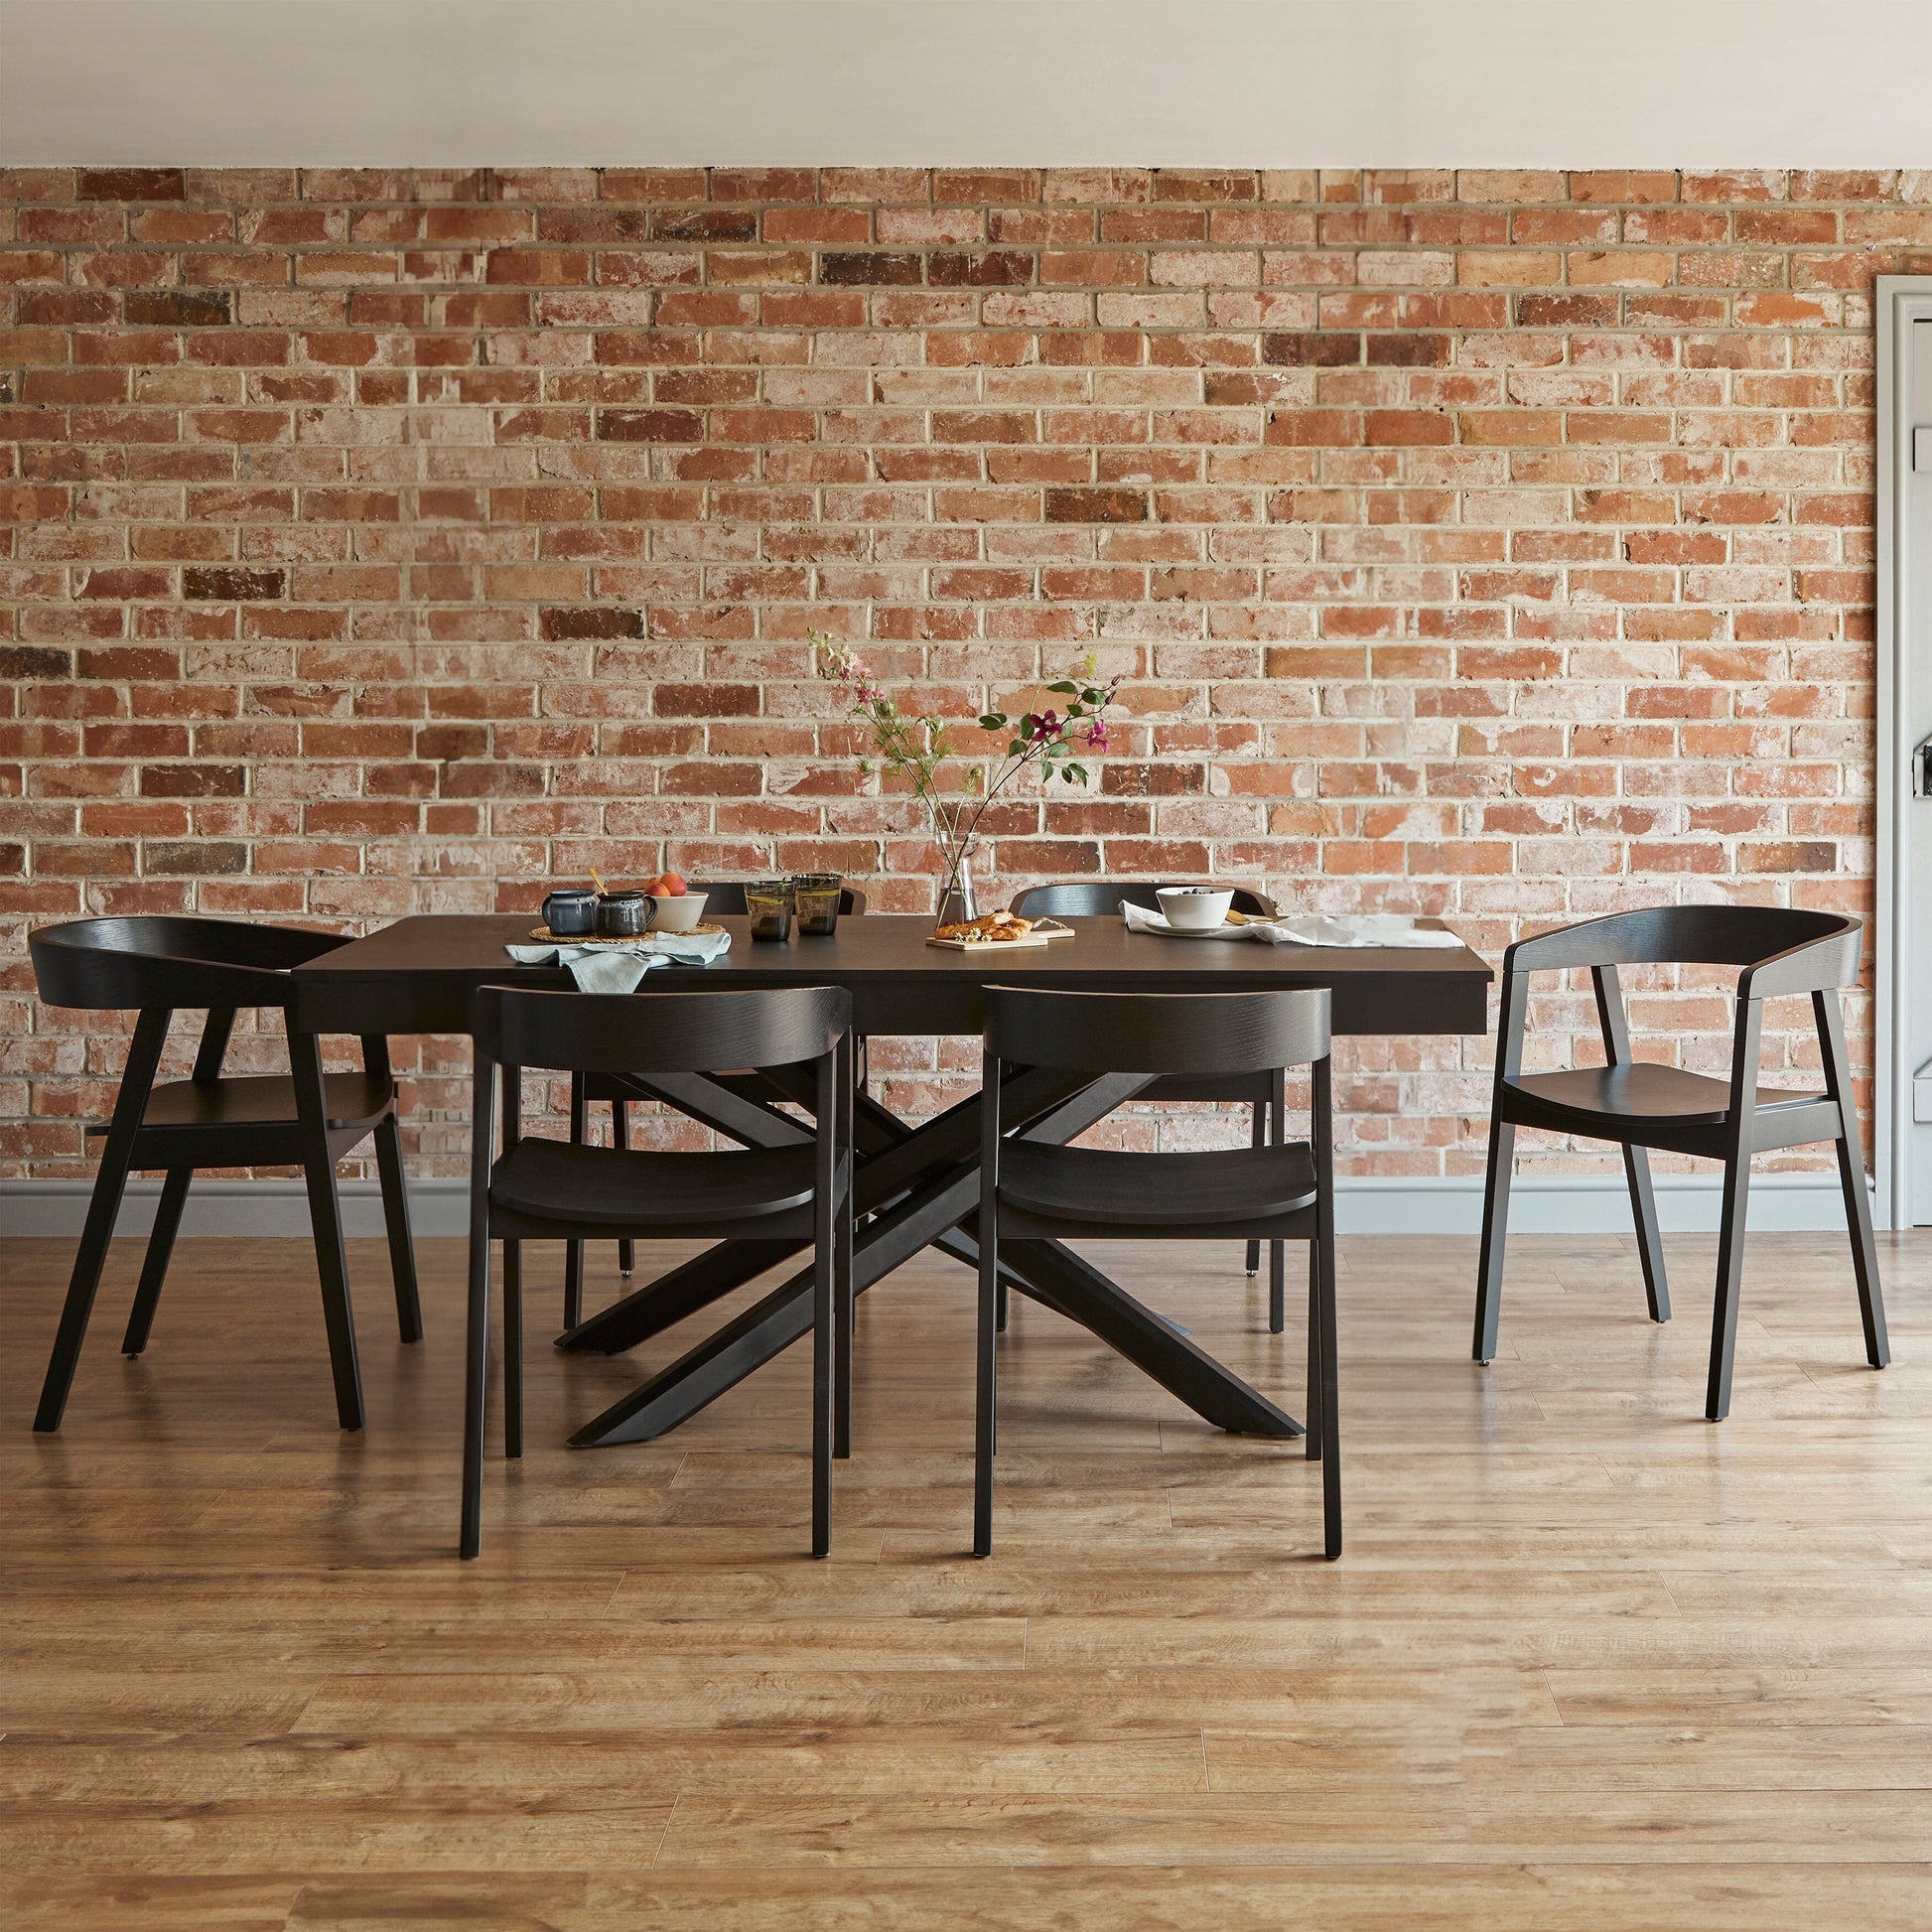 Amelia Black dining table - 6 seater - Ella Black wooden chairs - Laura James